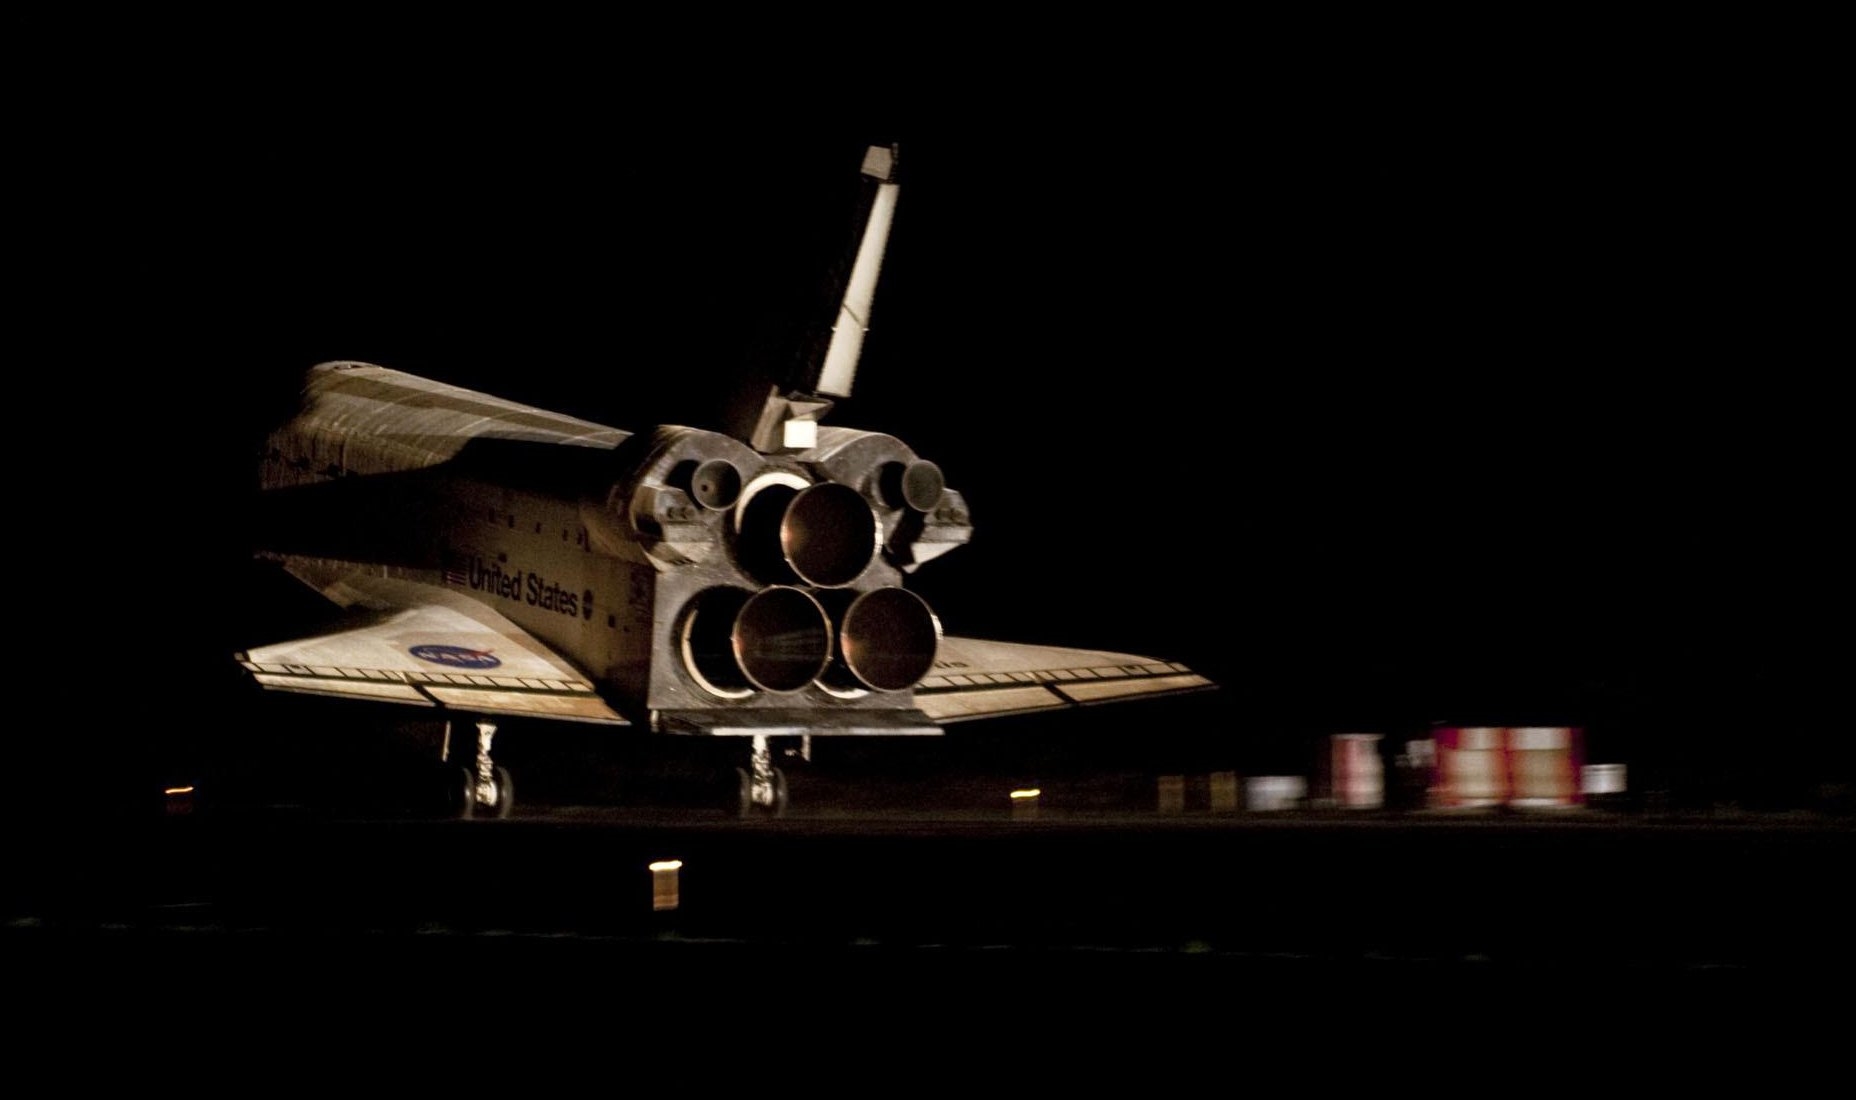  The final space shuttle,  Atlantis , lands at the Kennedy Space Center's Shuttle Landing Facility in on July 21, 2011. Photo Credit: NASA 